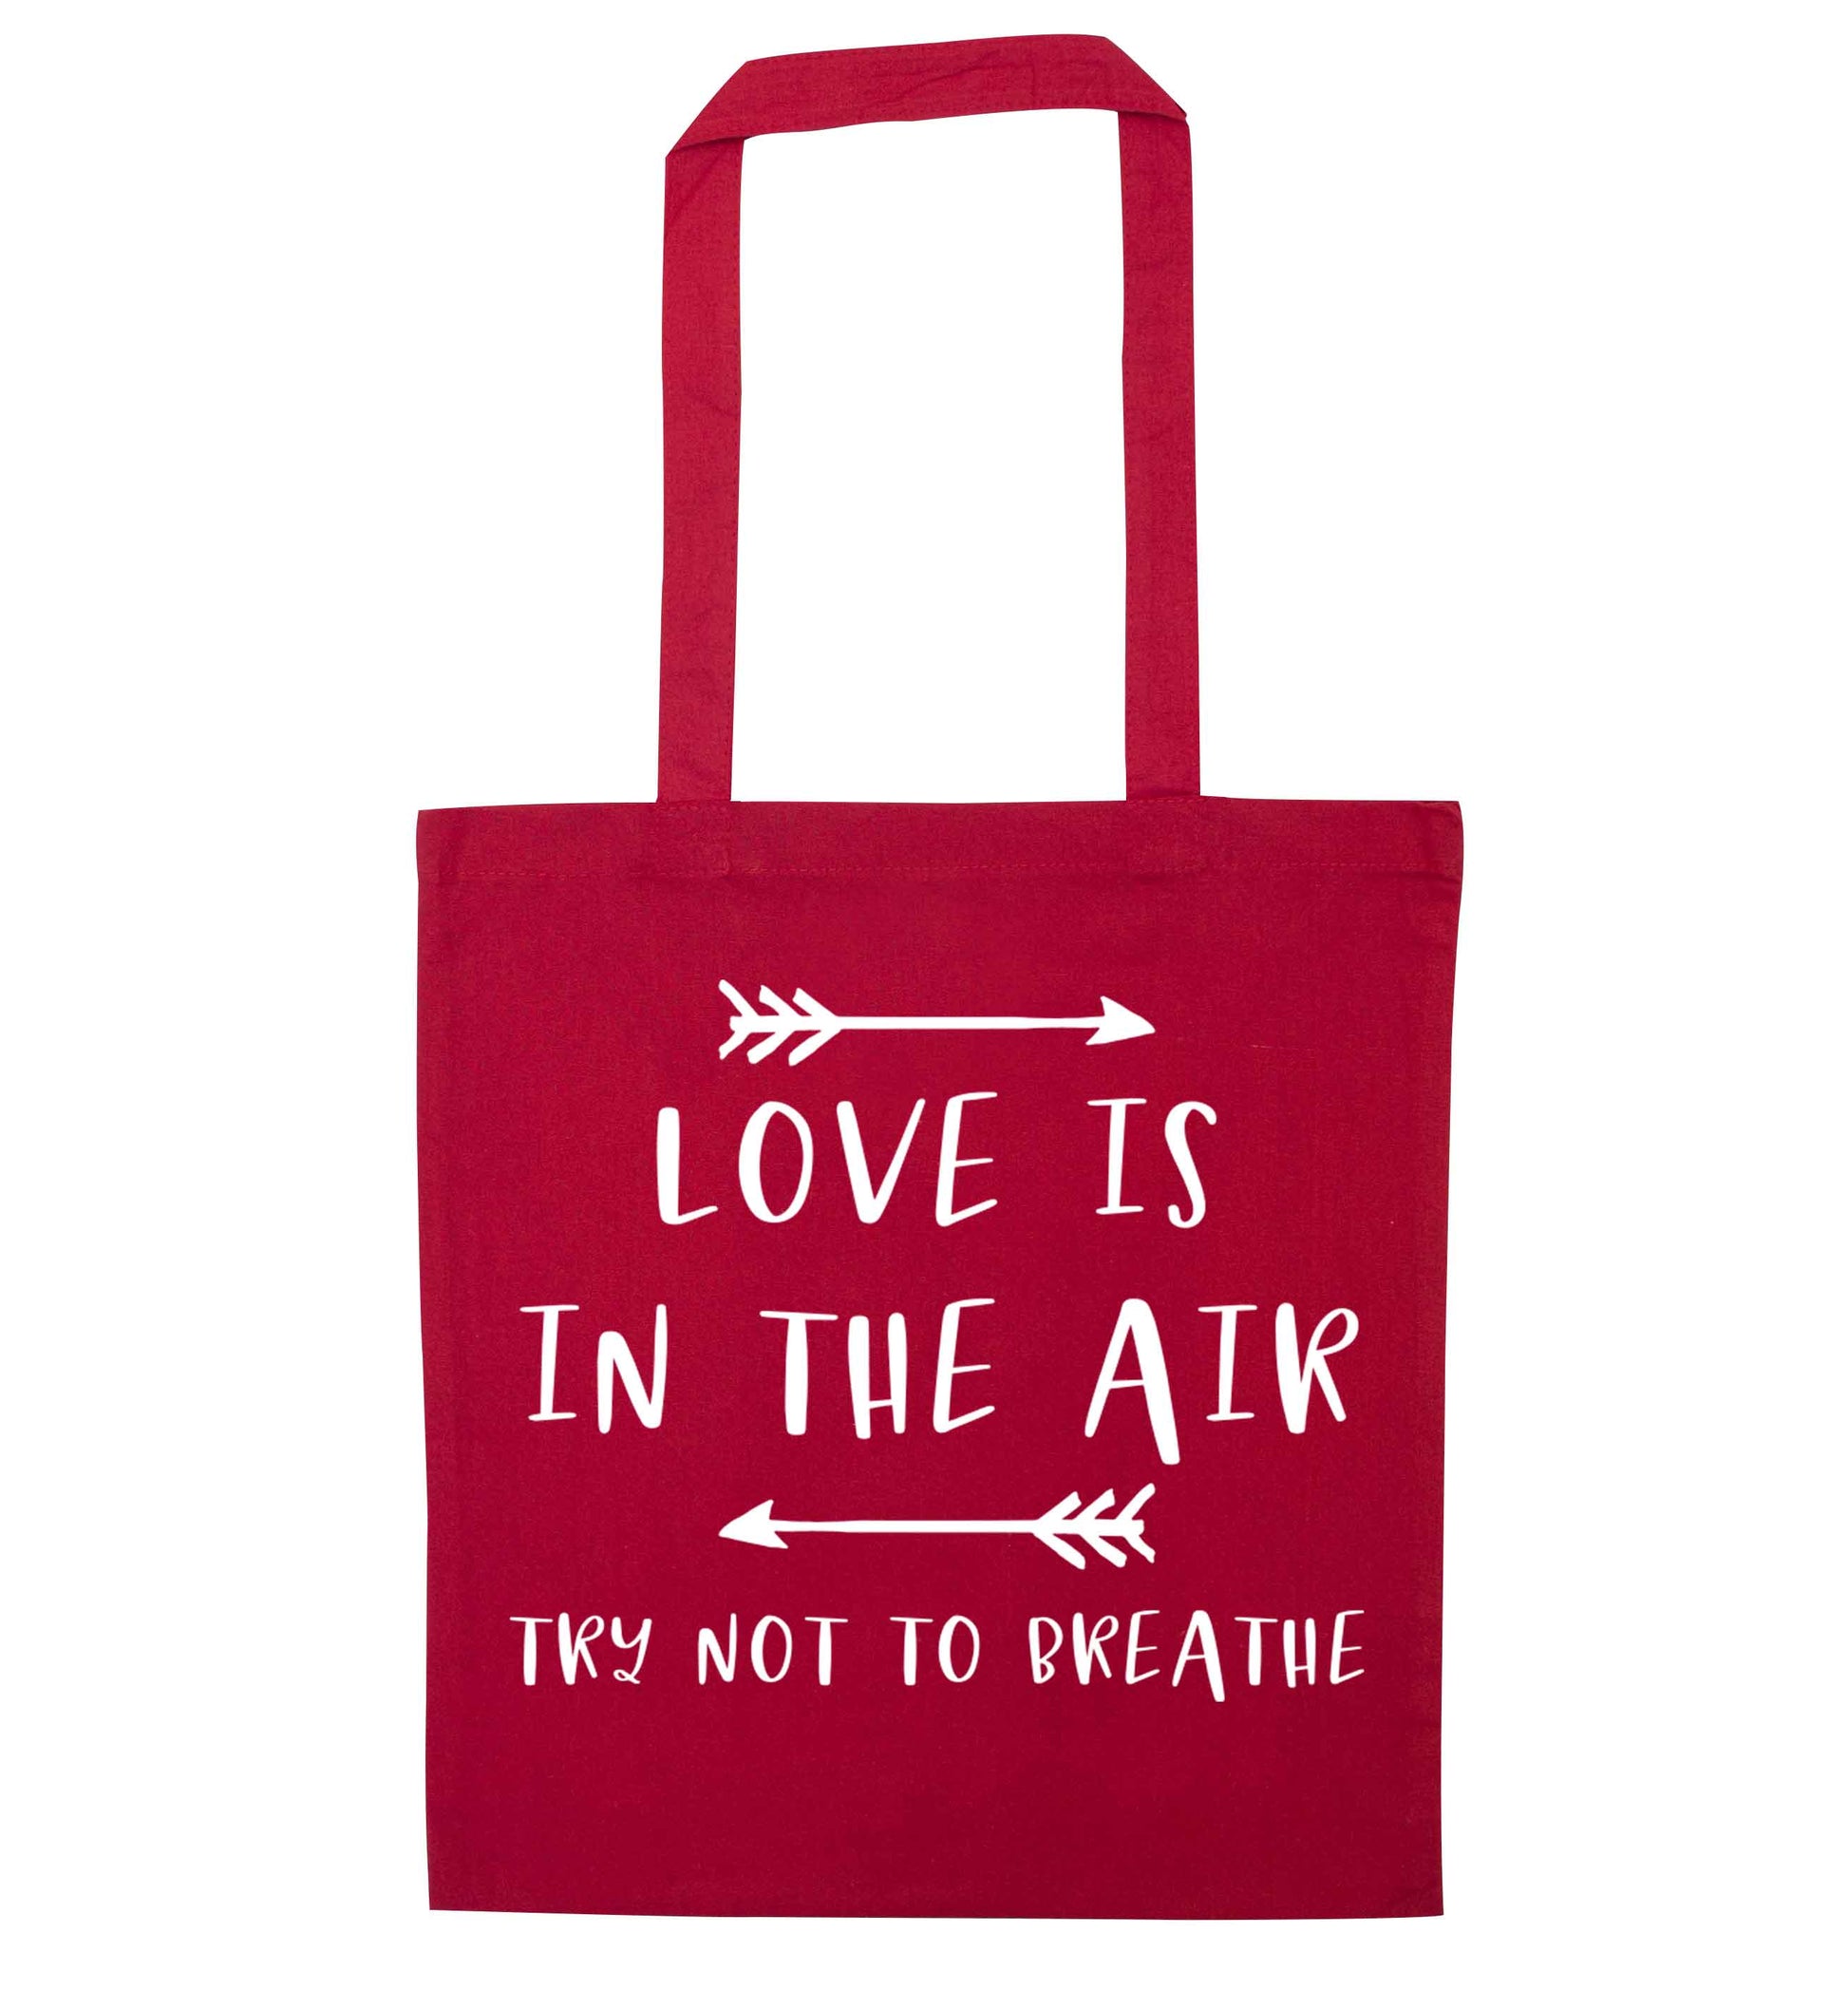 Love is in the air try not to breathe red tote bag